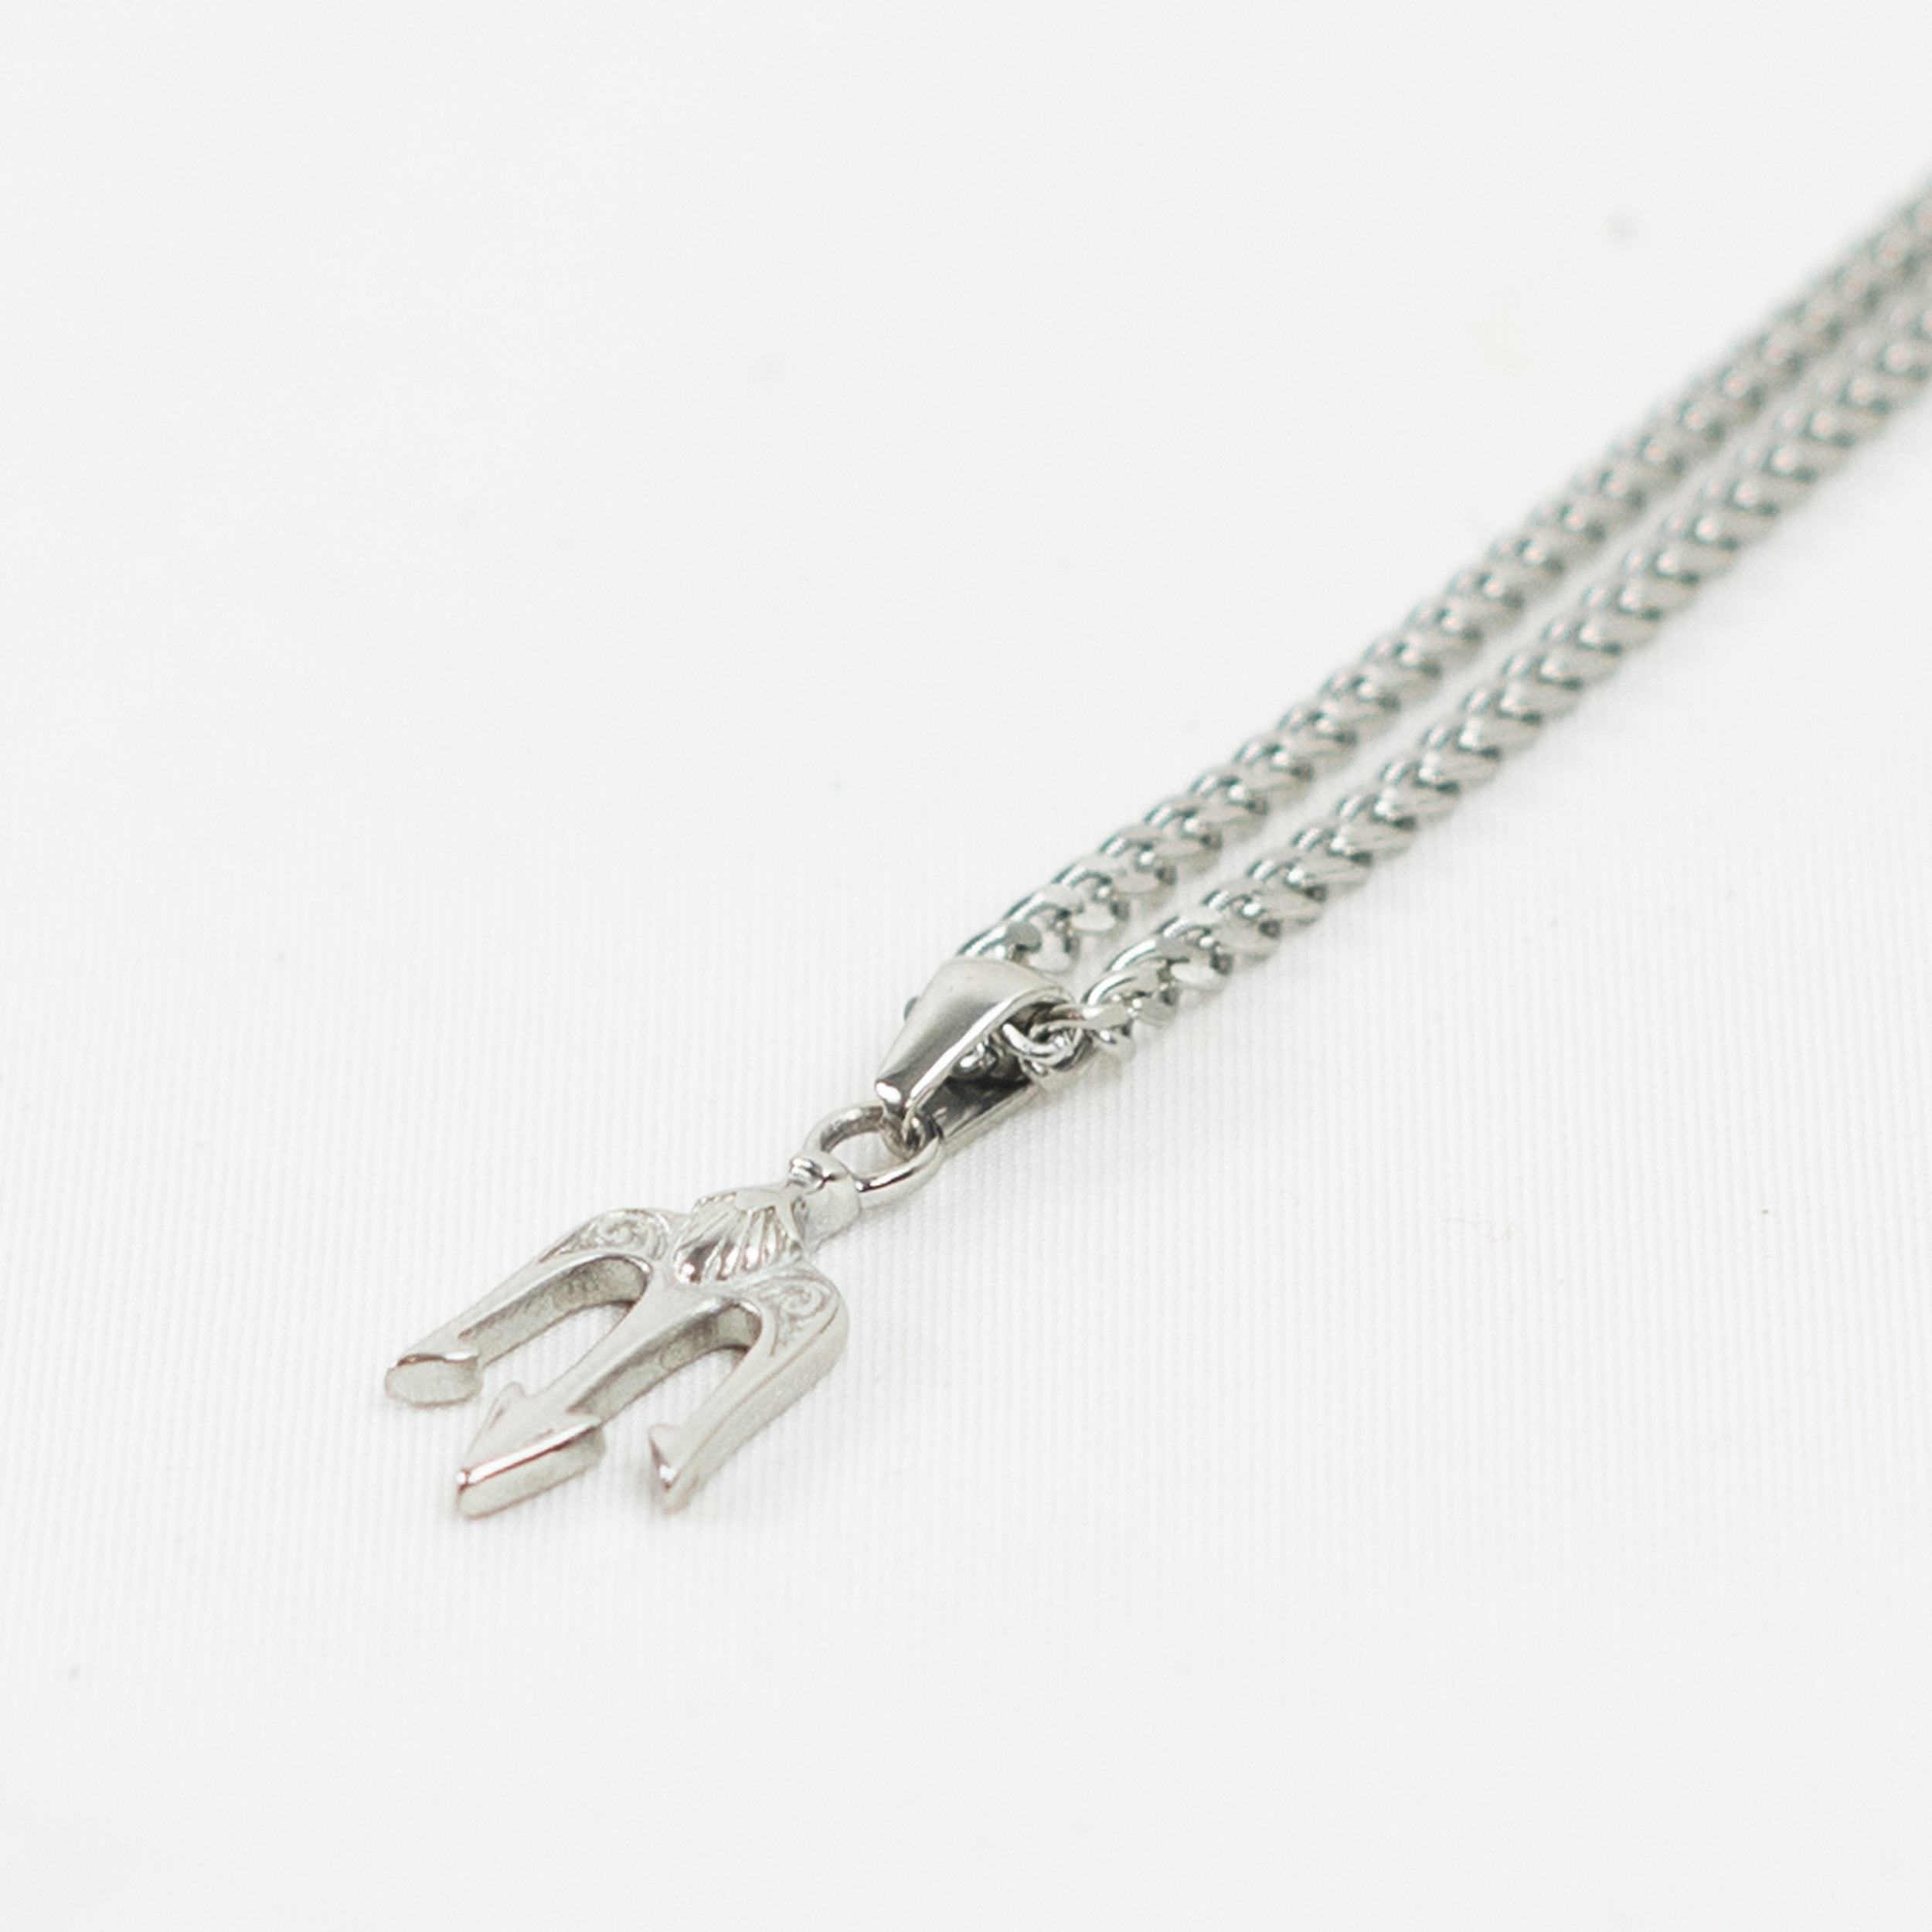 Trident Necklace (Silver) - MAKAIO